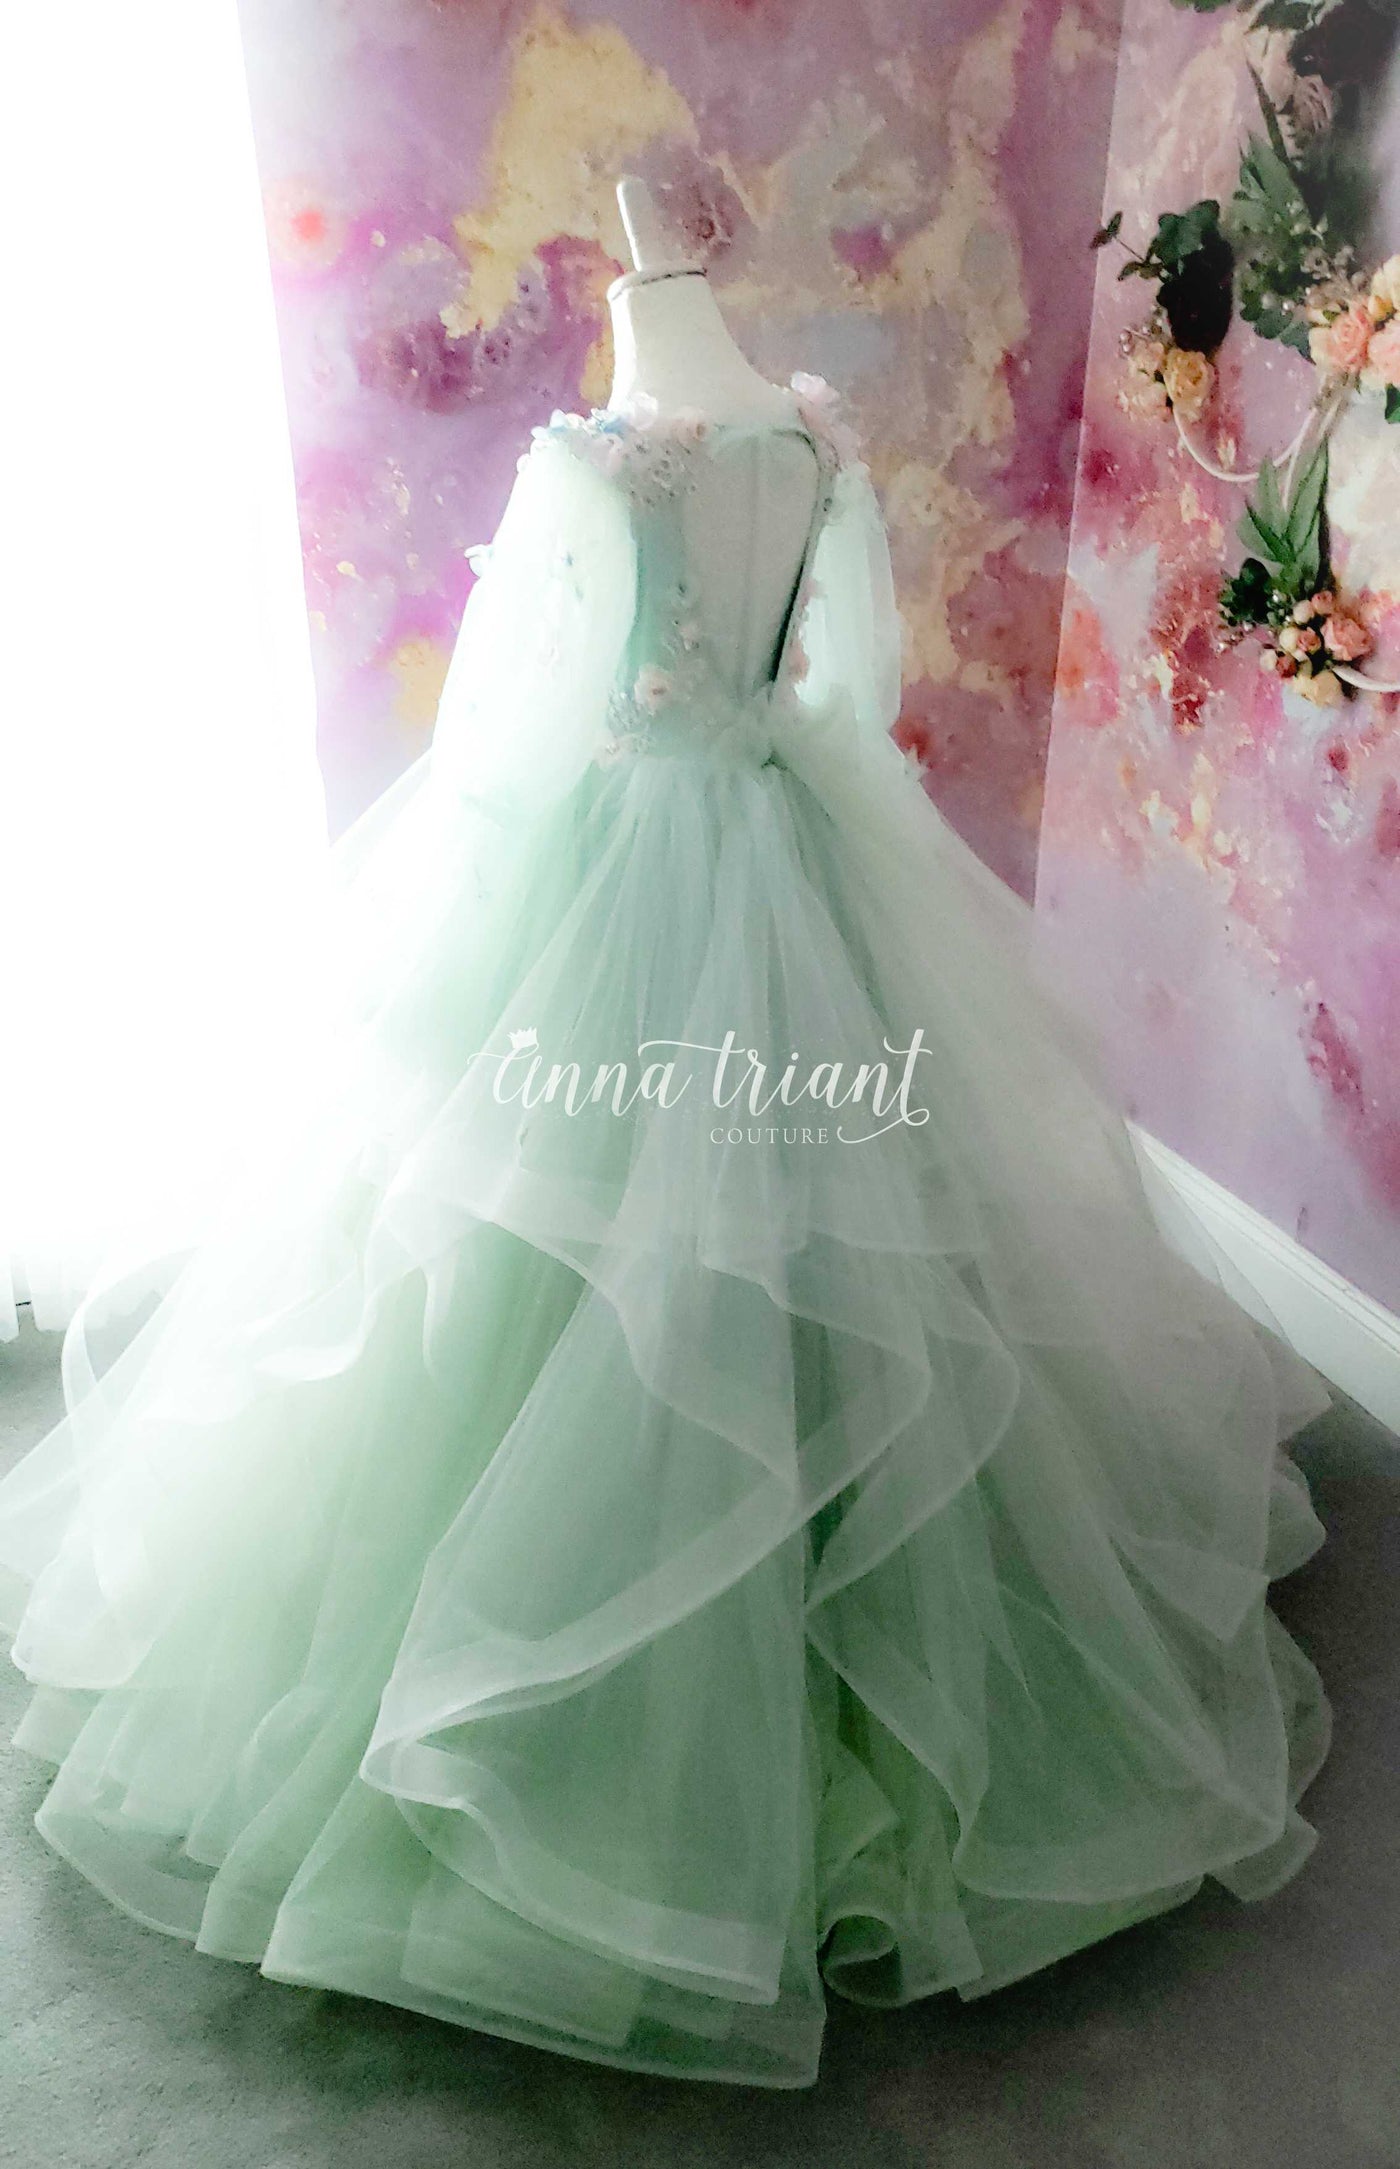 Serenity Gown in Mint and Blue